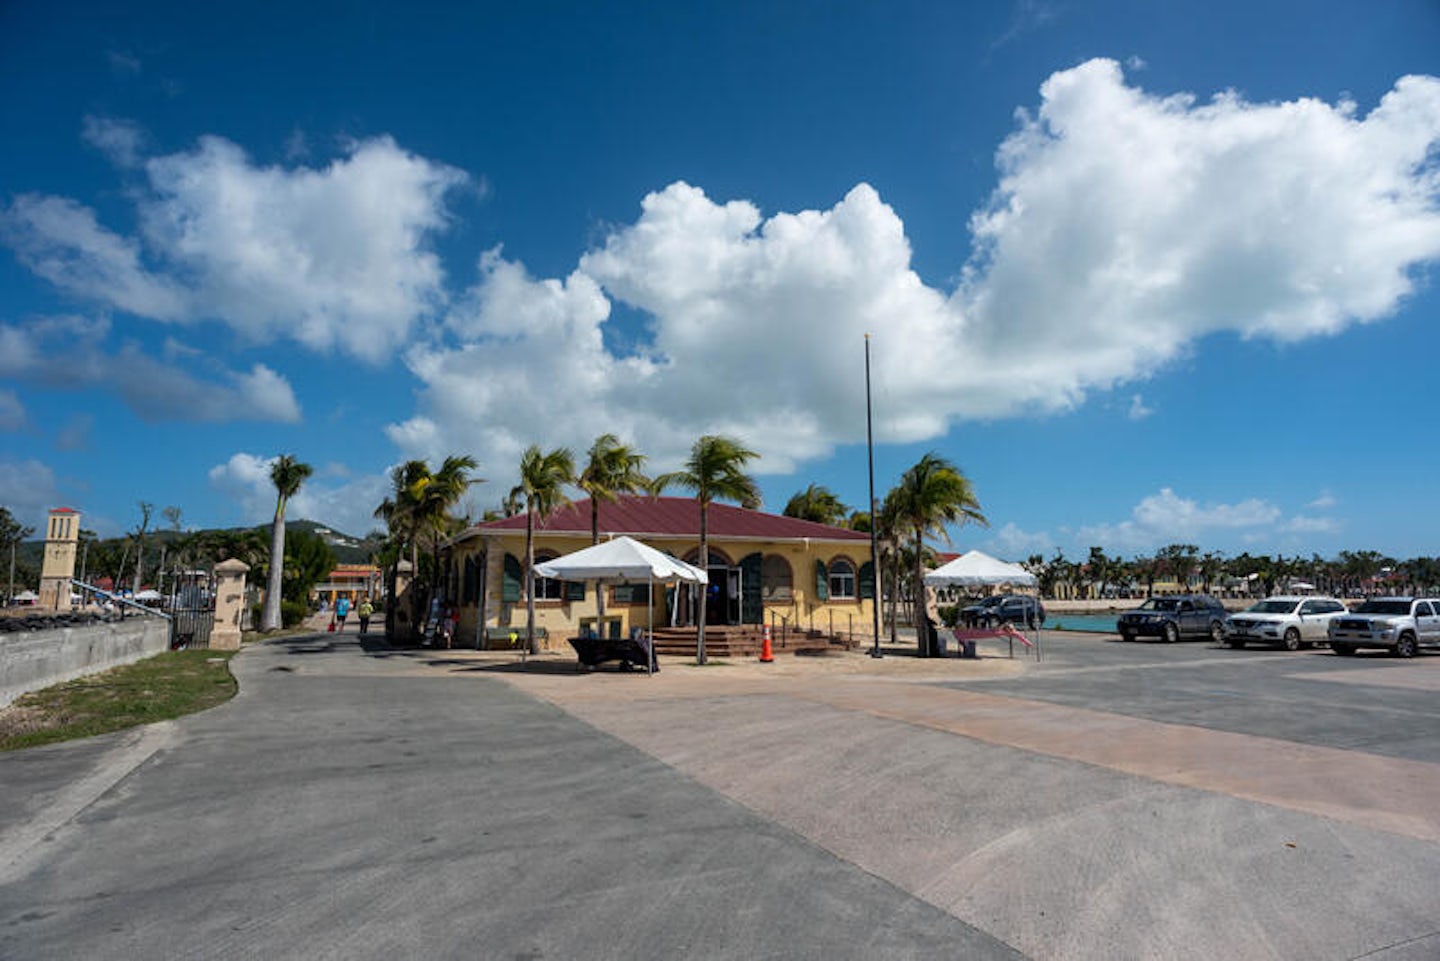 Frederiksted Cruise Port